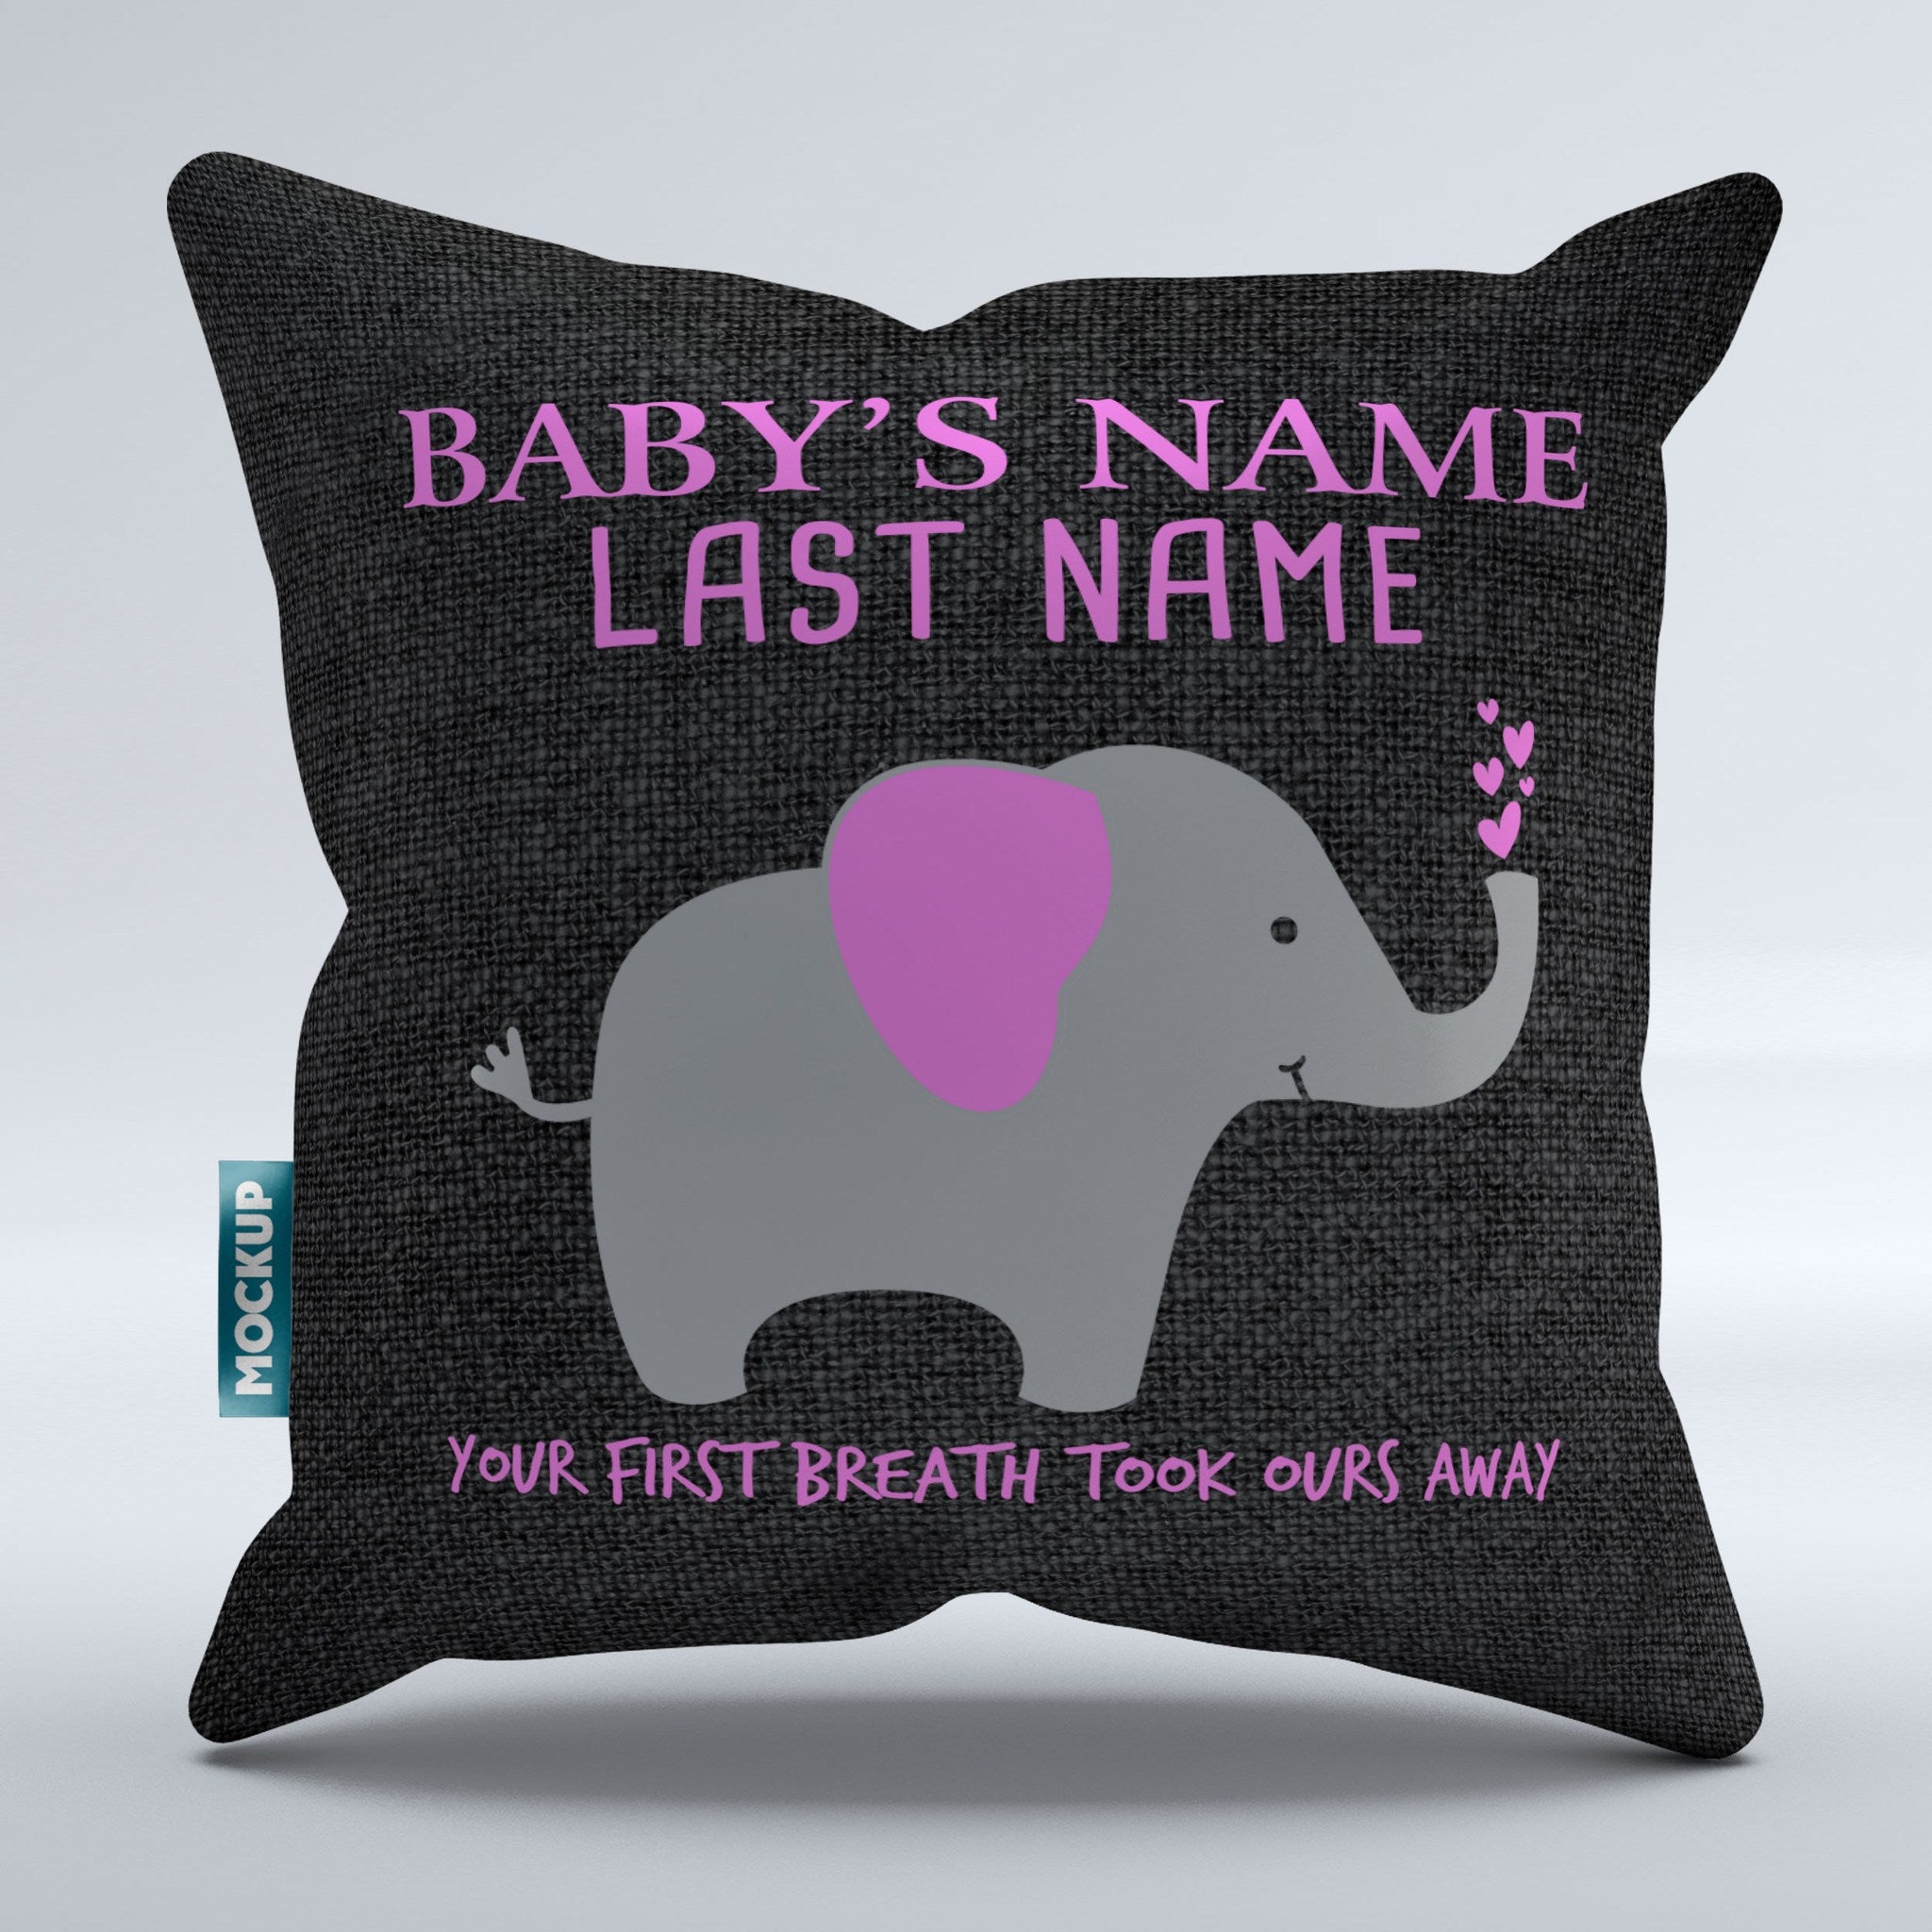 Your First Breath Took Ours Away Personalized Pillow Cover - Throw Pillow Cover - 18" x 18"